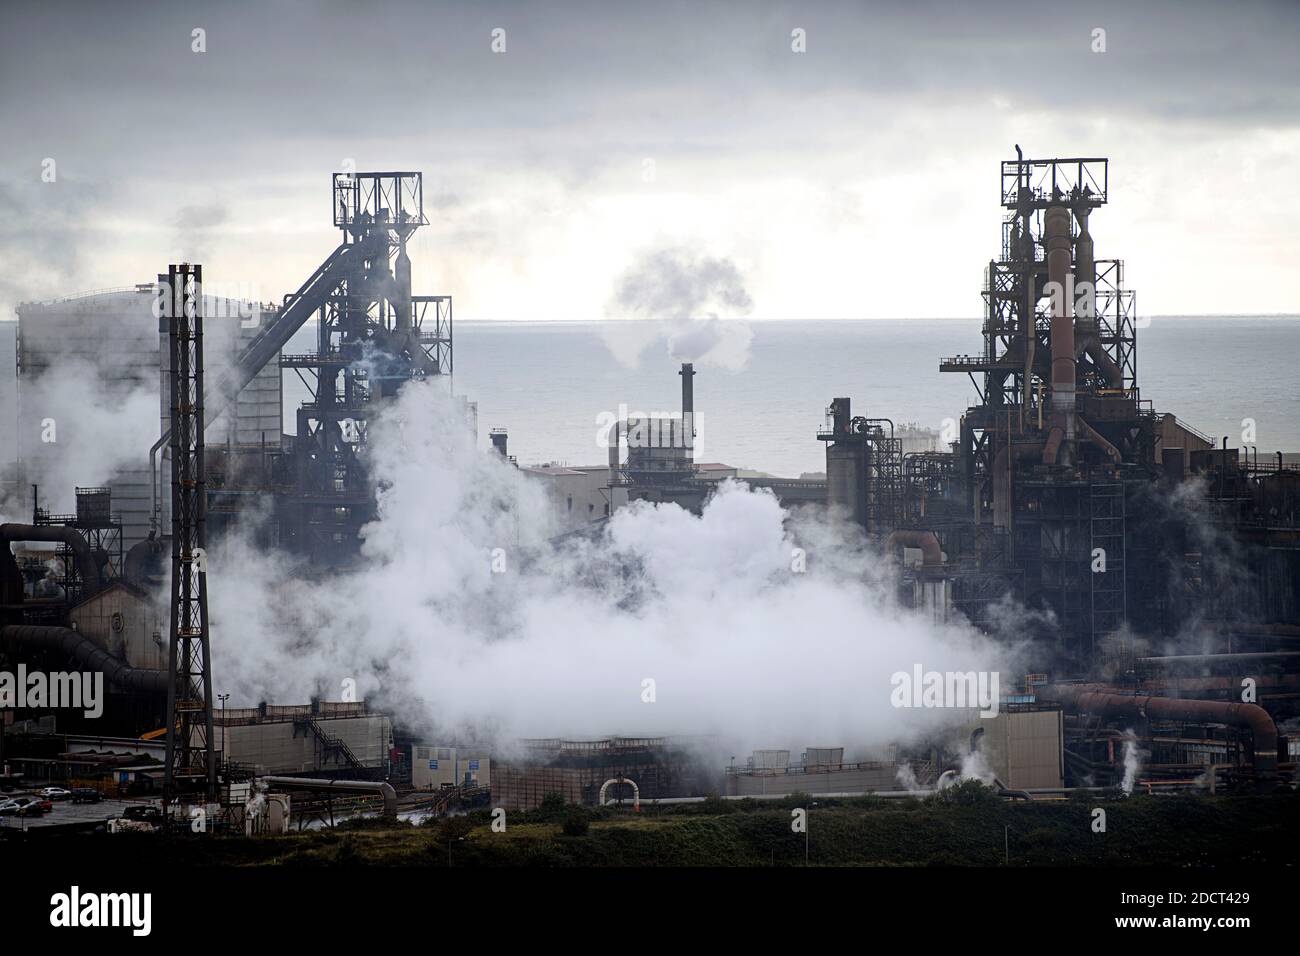 Blast furnaces 4 & 5 at the Tata Steelworks in Port Talbot, South Wales UK Stock Photo